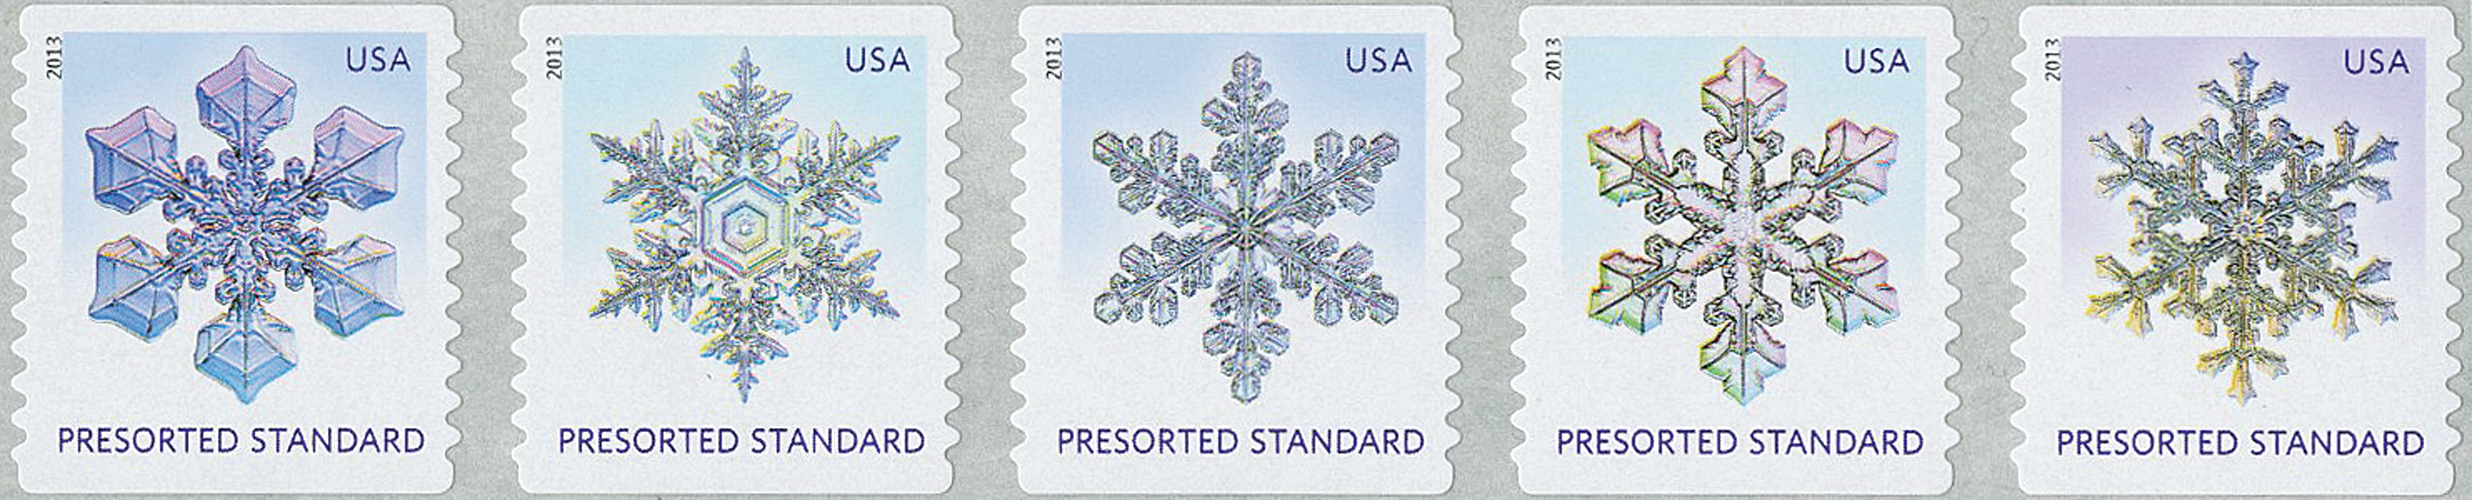 New Forever Geometric Snowflakes stamps bring color and cheer